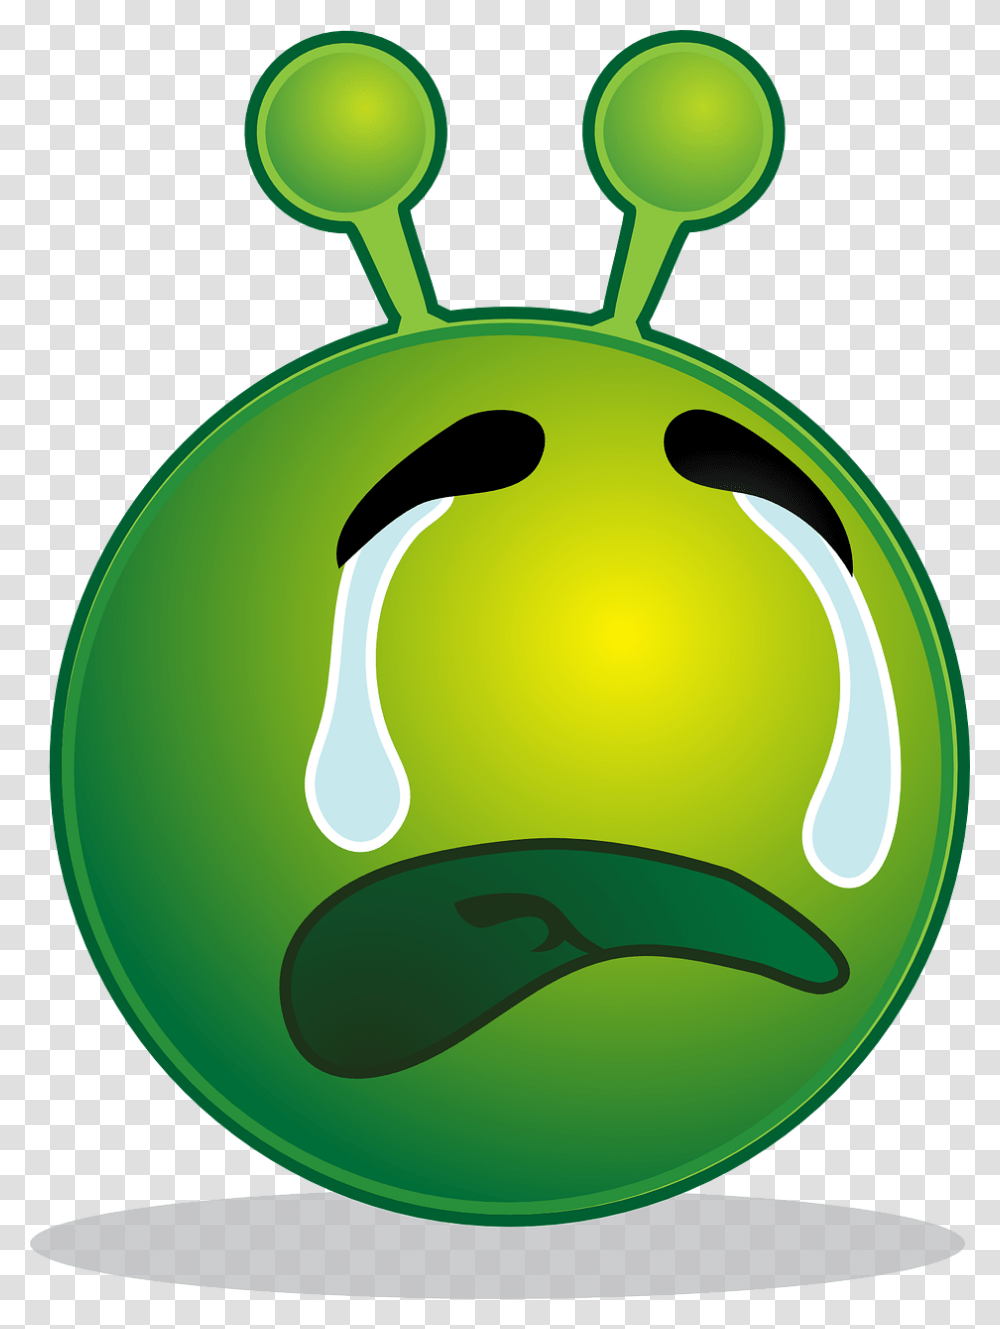 Sorry For Time Waste, Plant, Animal, Droplet, Water Transparent Png